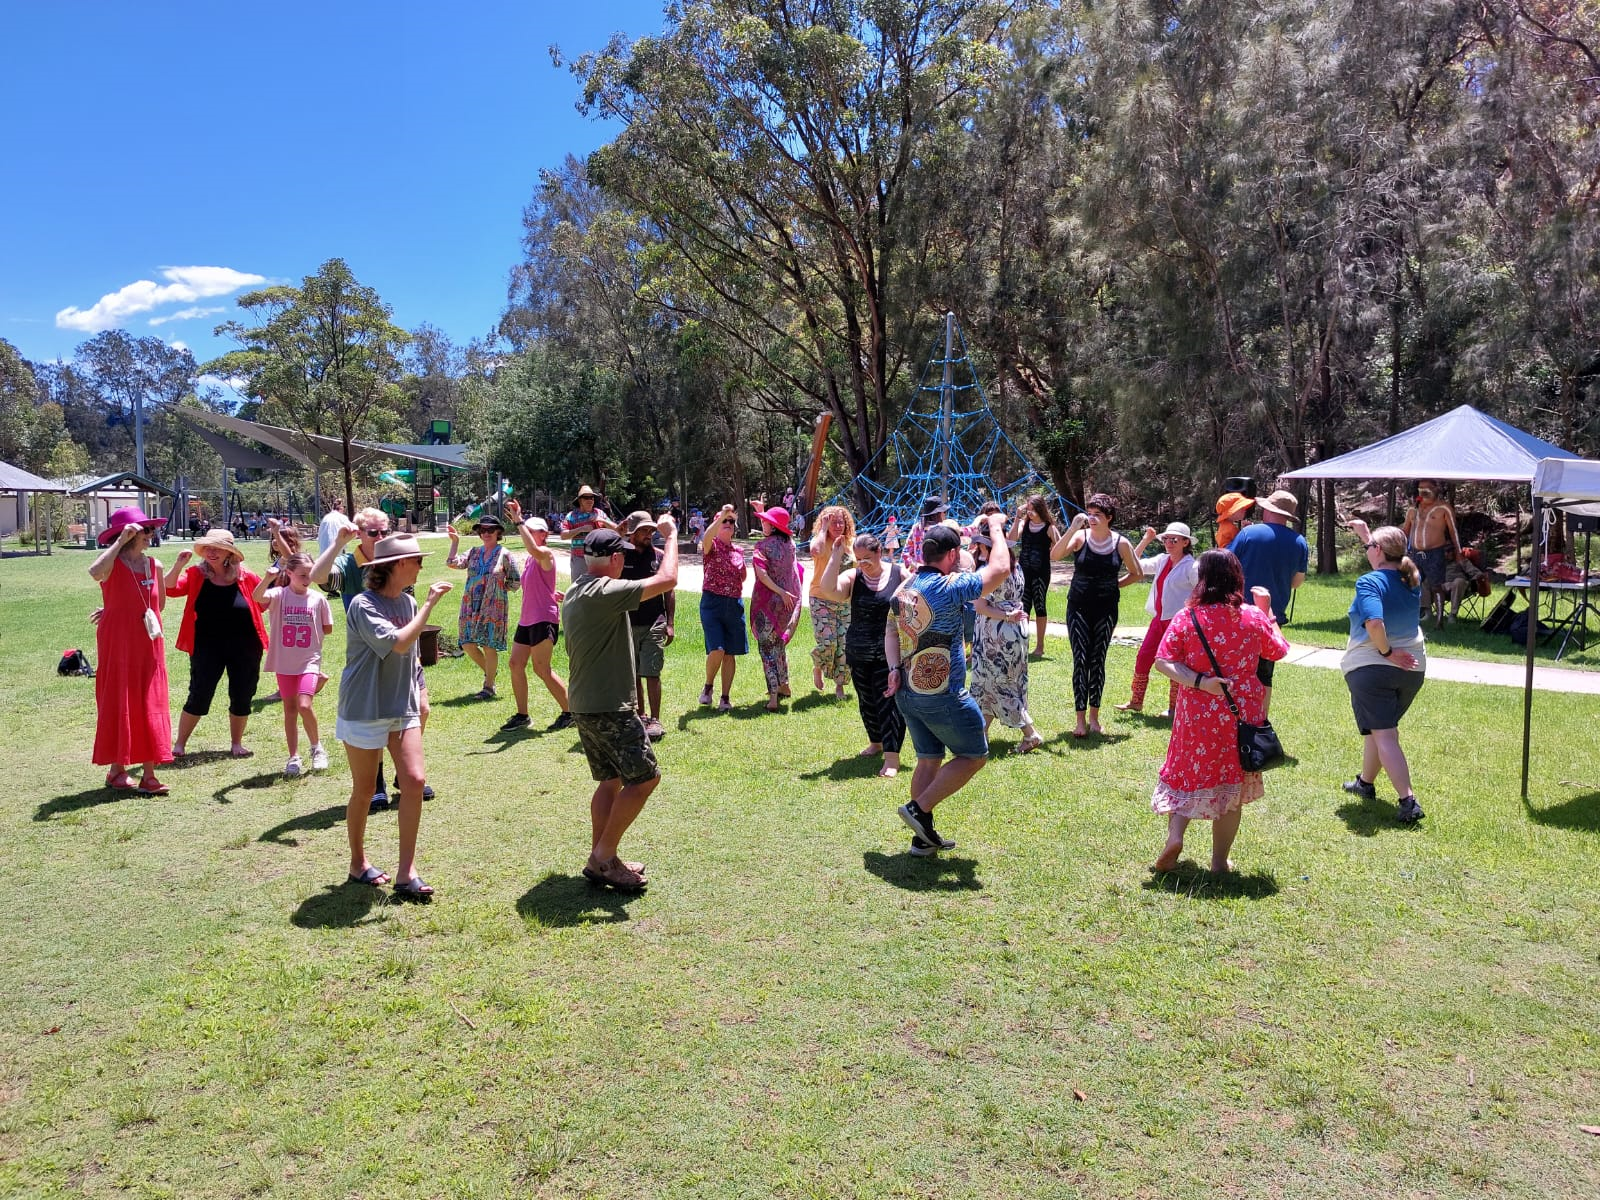 Group dancing together at previous Reconciliation Day Picnic